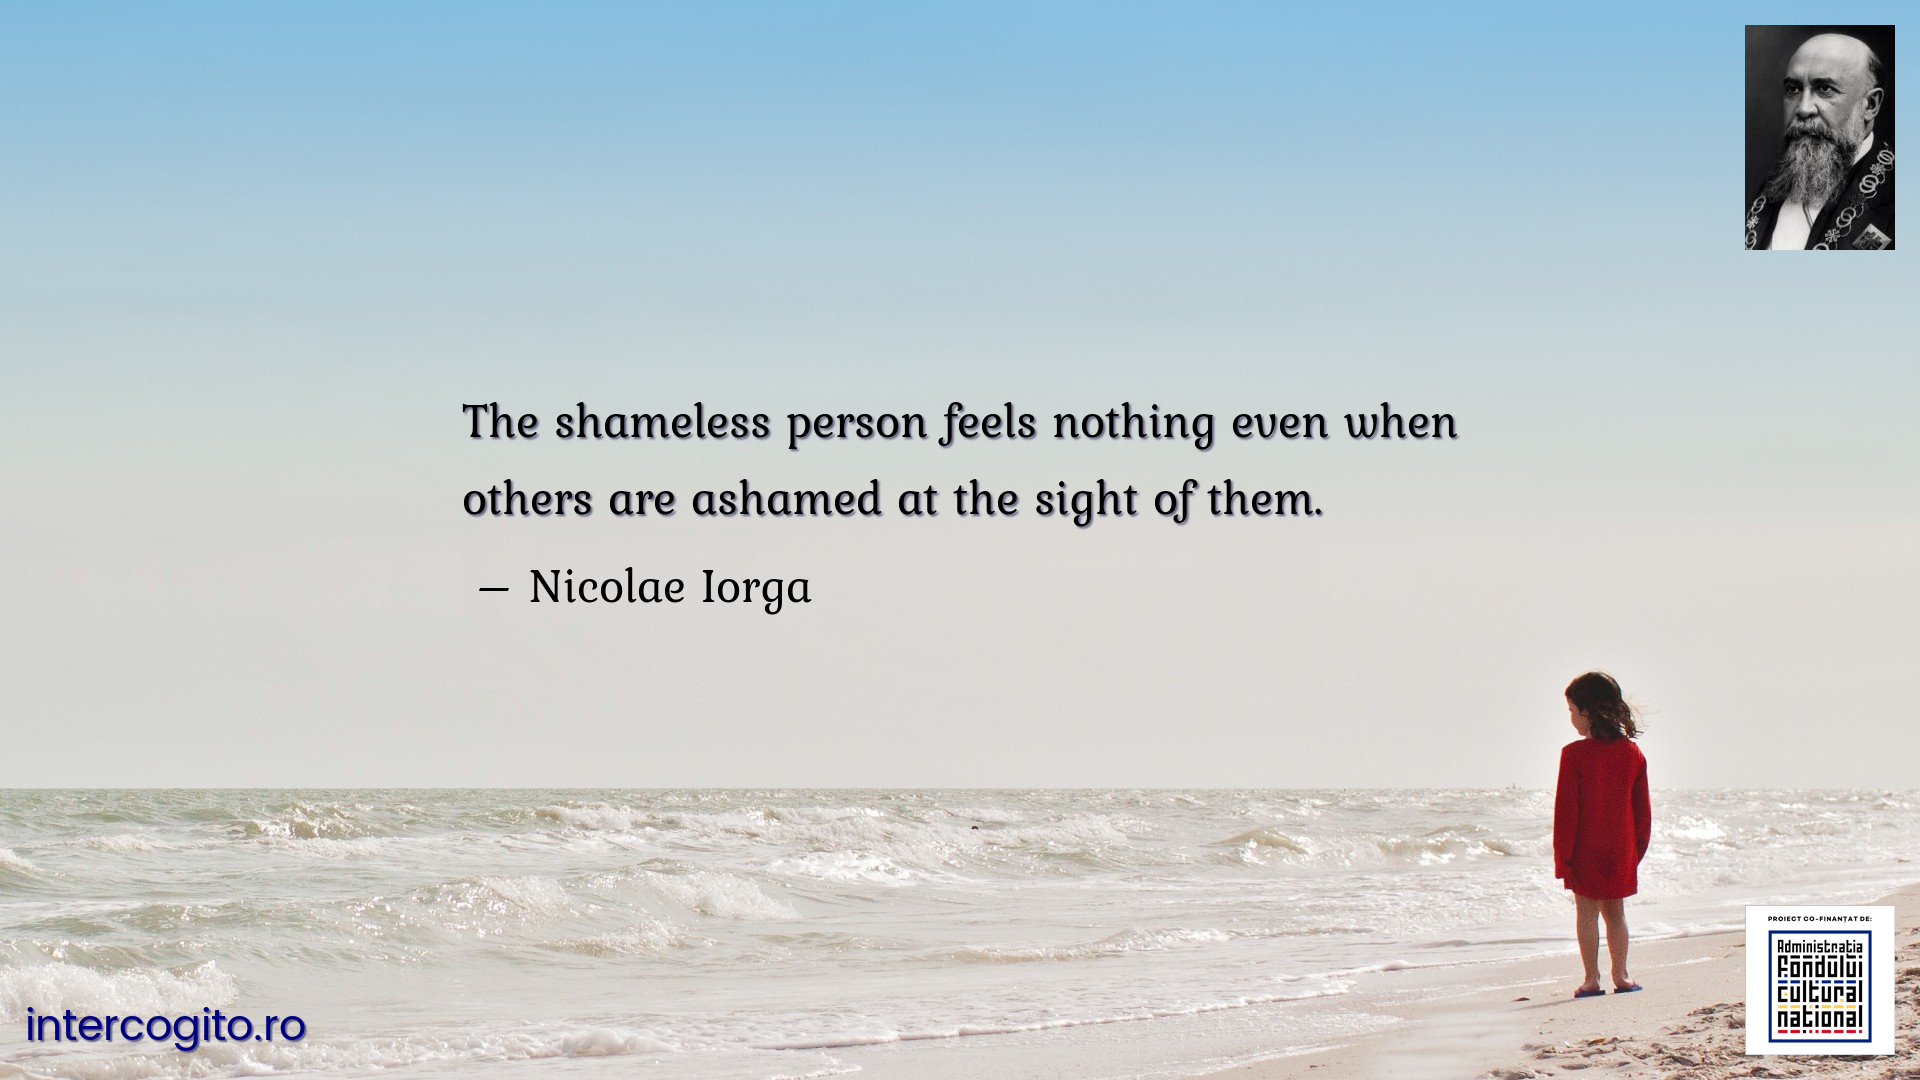 The shameless person feels nothing even when others are ashamed at the sight of them.